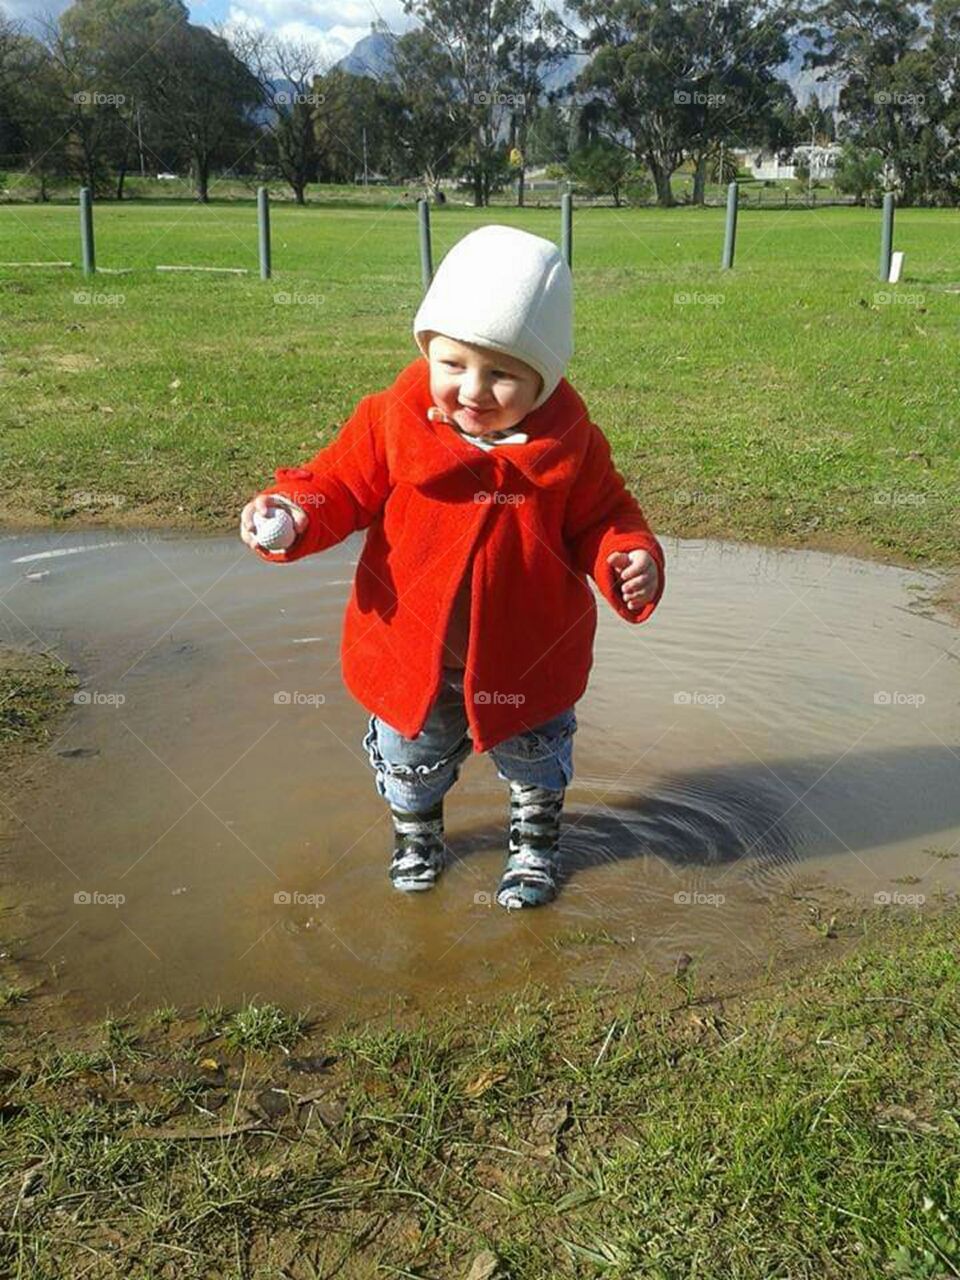 Dancing in puddles